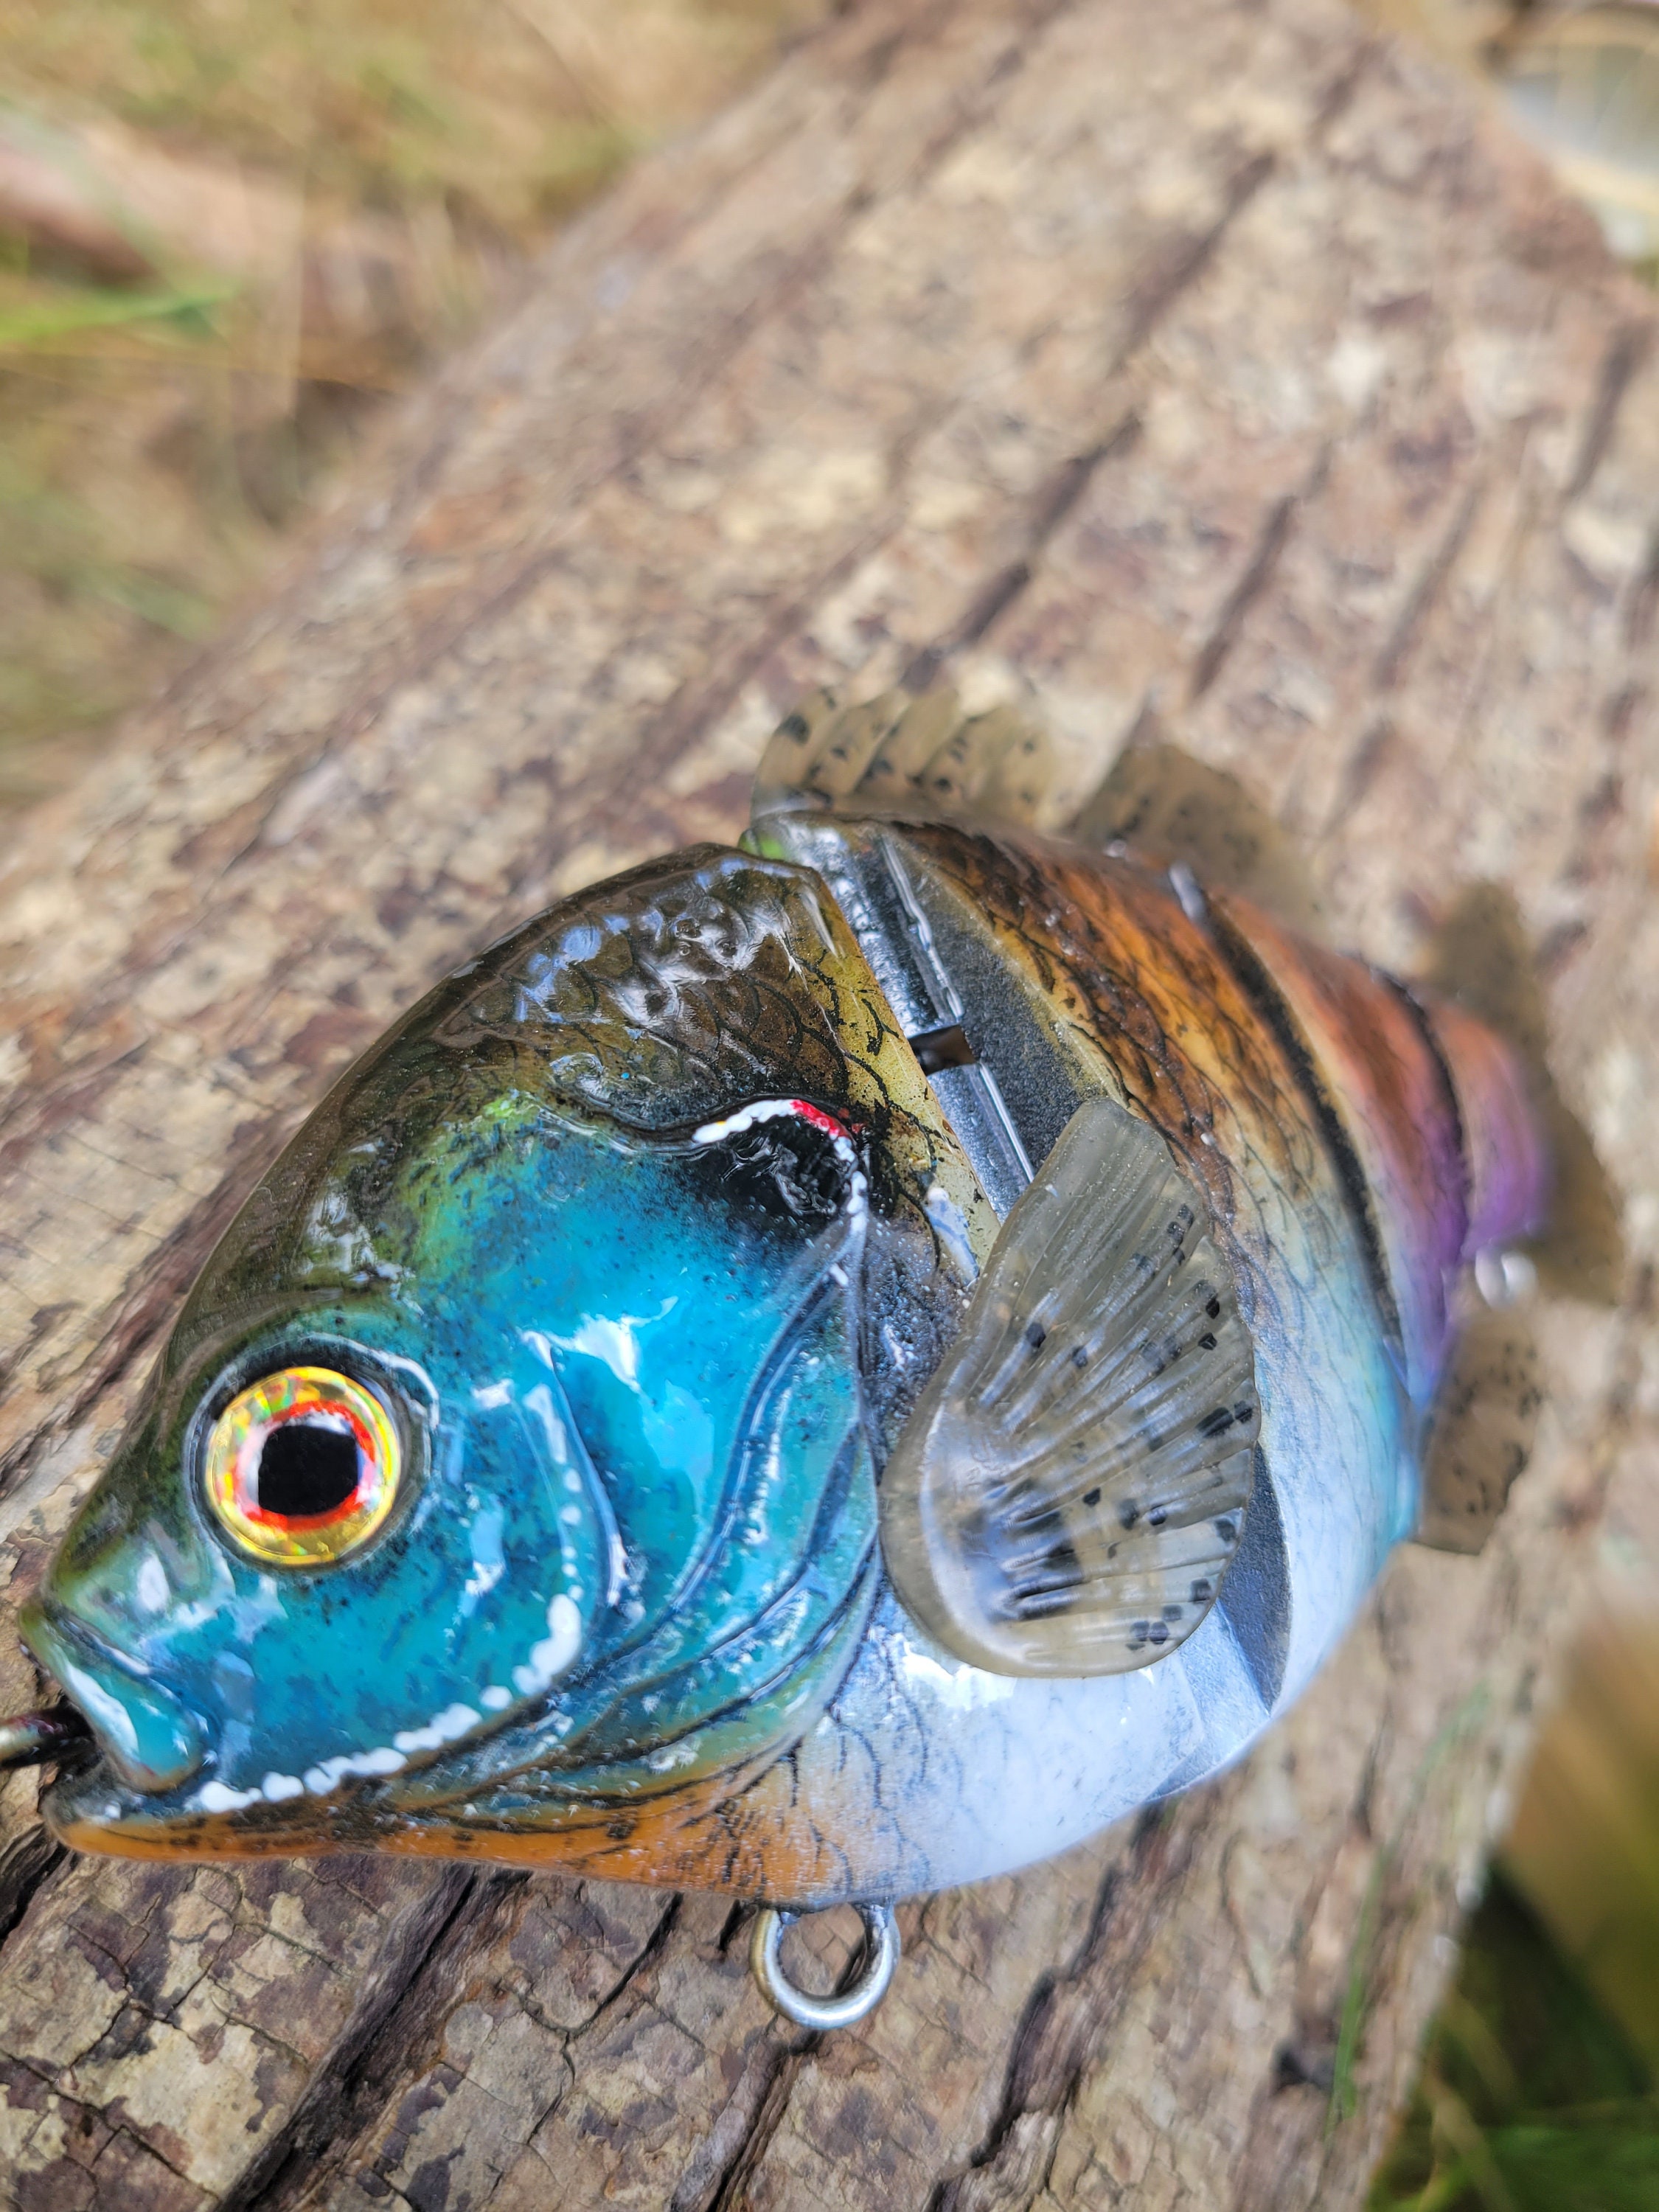 30 Acre deluxe Gill Style Swimbait. Custom Painted. This Lure is  Discontinued at Their Site. 